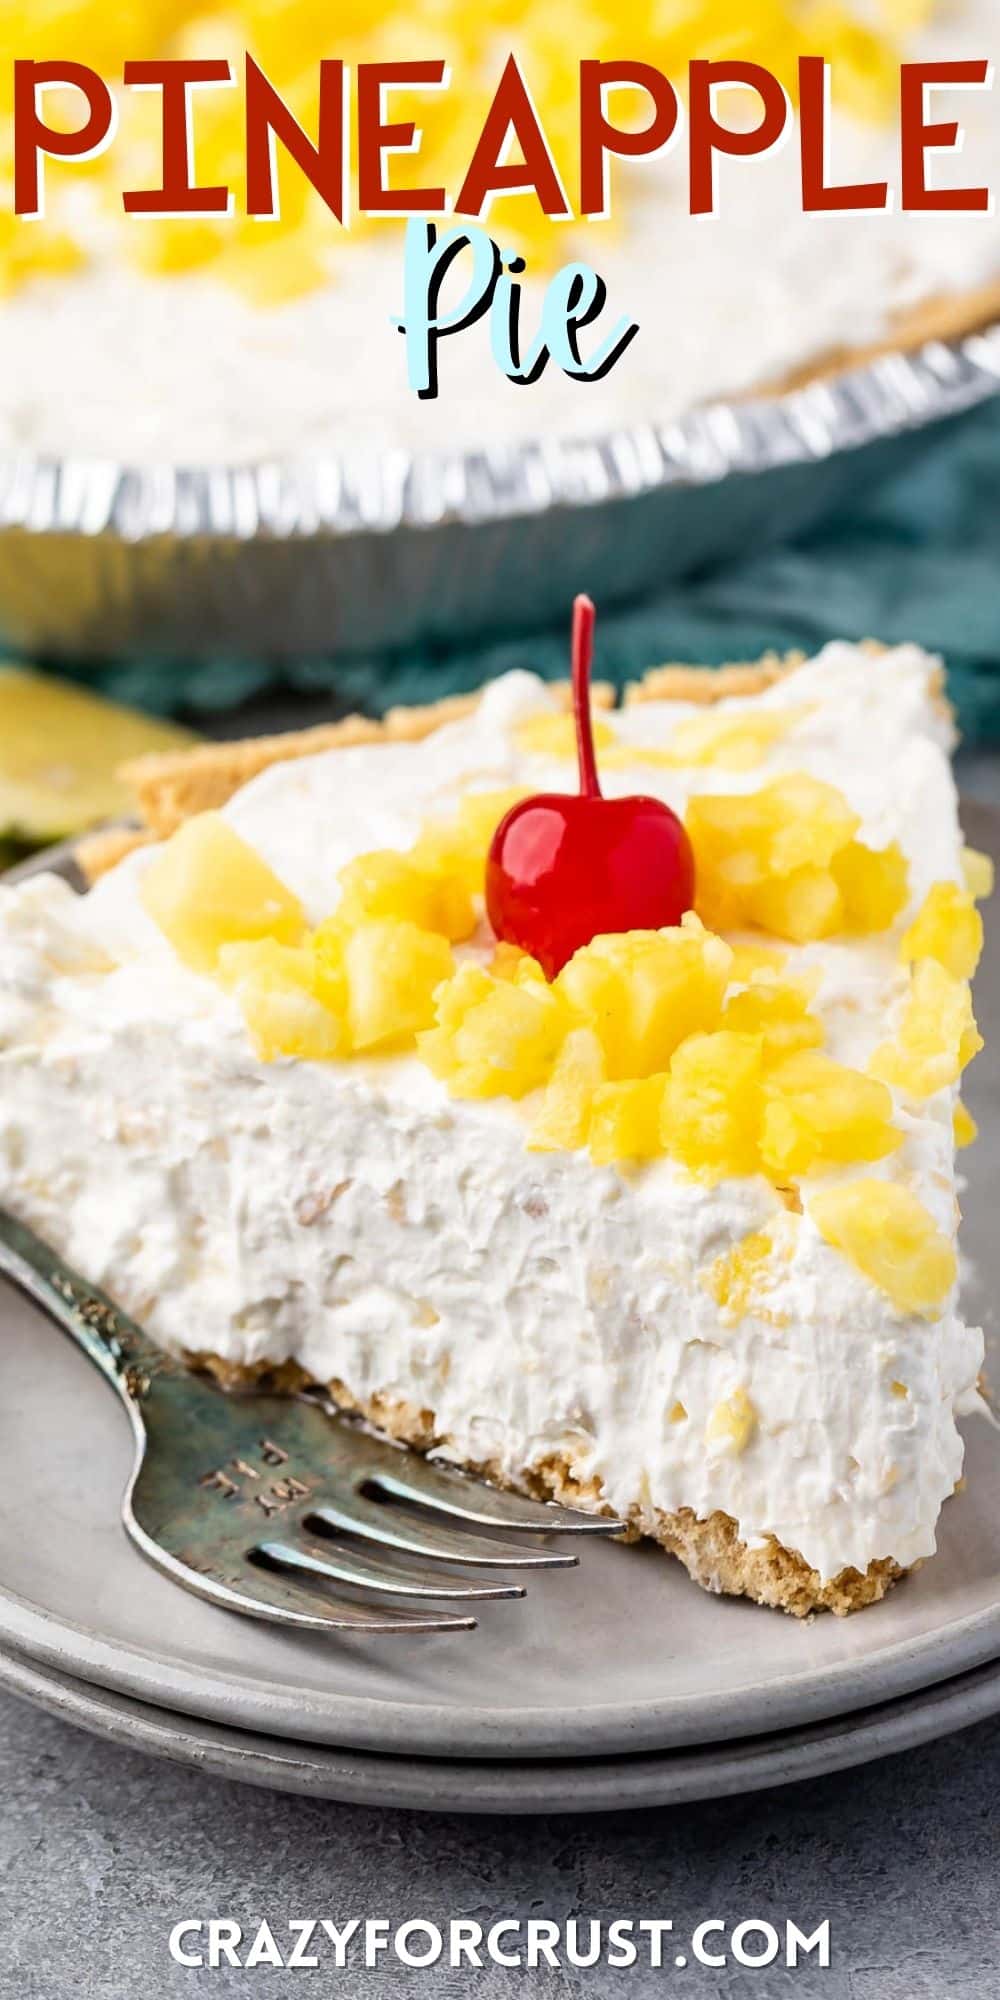 pie with a graham cracker crust and pineapple and a cherry on top with words on the image.